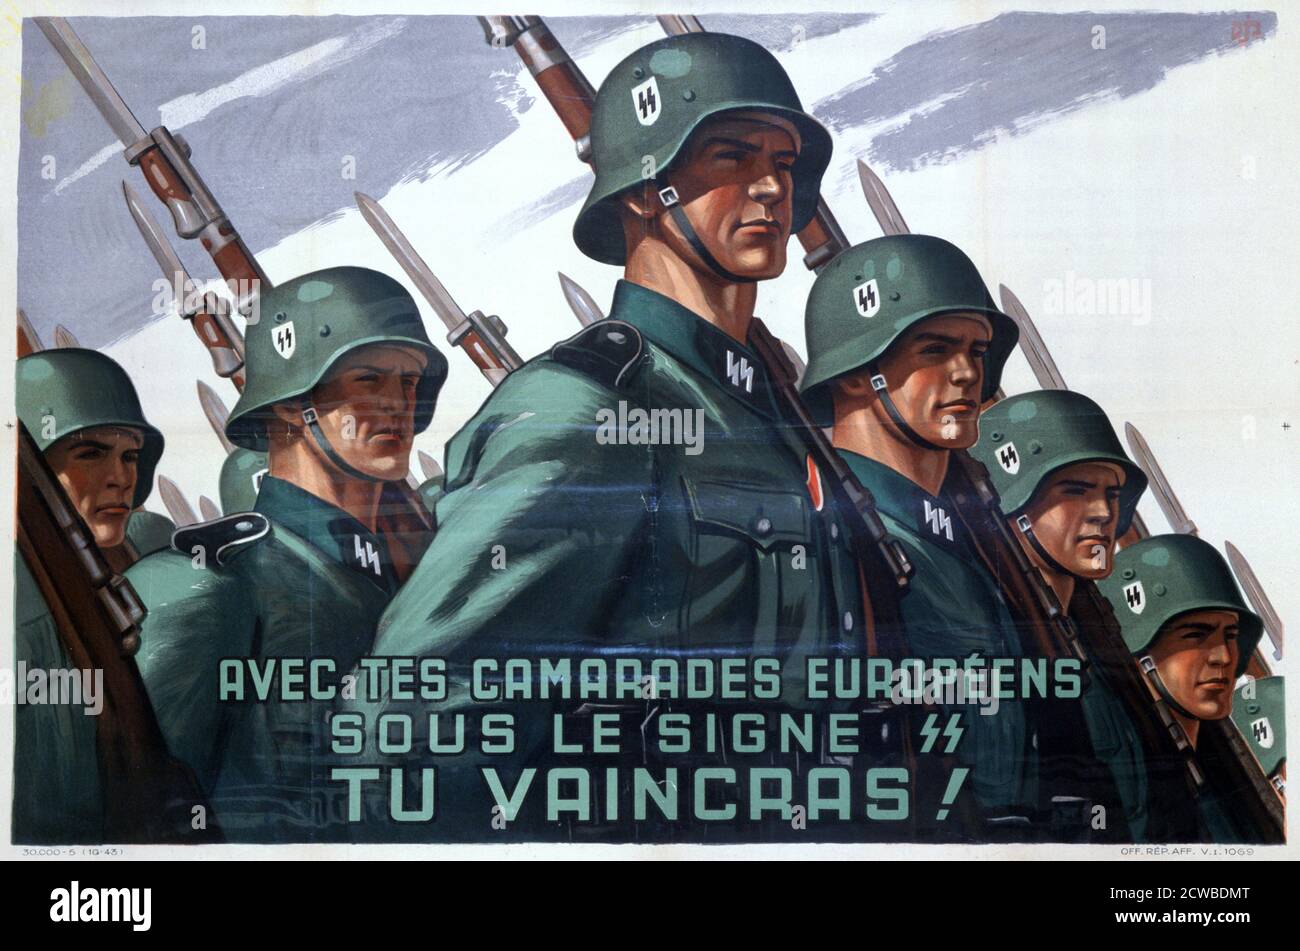 French recruitment poster for the SS, 1943-1944. Frenchmen were eligible to join the SS from 20 July 1943. Several thousand volunteered and in 1944 the 33rd SS 'Charlemagne' Division was created out of an amalgamation of French units serving with the Wehrmacht and SS. The division fought on the Eastern Front. In the final days of the Third Reich, French SS troops were amongst the guards of Hitler's bunker. The artist is unknown. Stock Photo